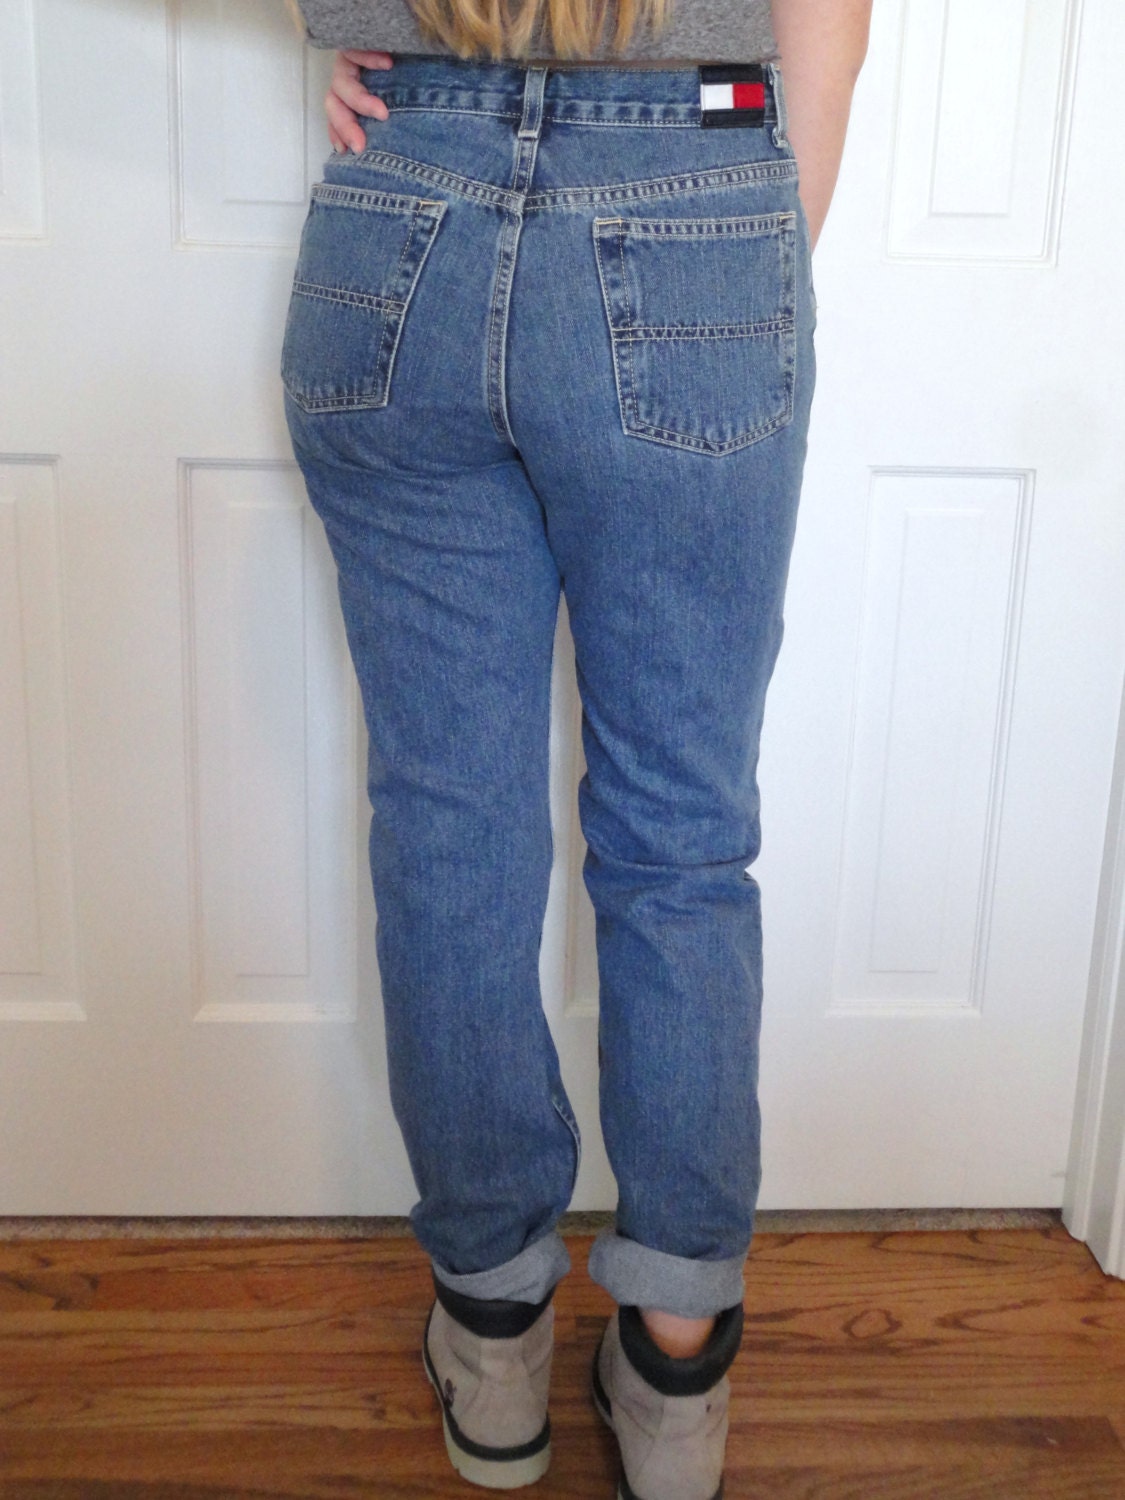 Vintage HIgh Waisted Tommy Hilfiger Jeans Medium by LilCribVintage